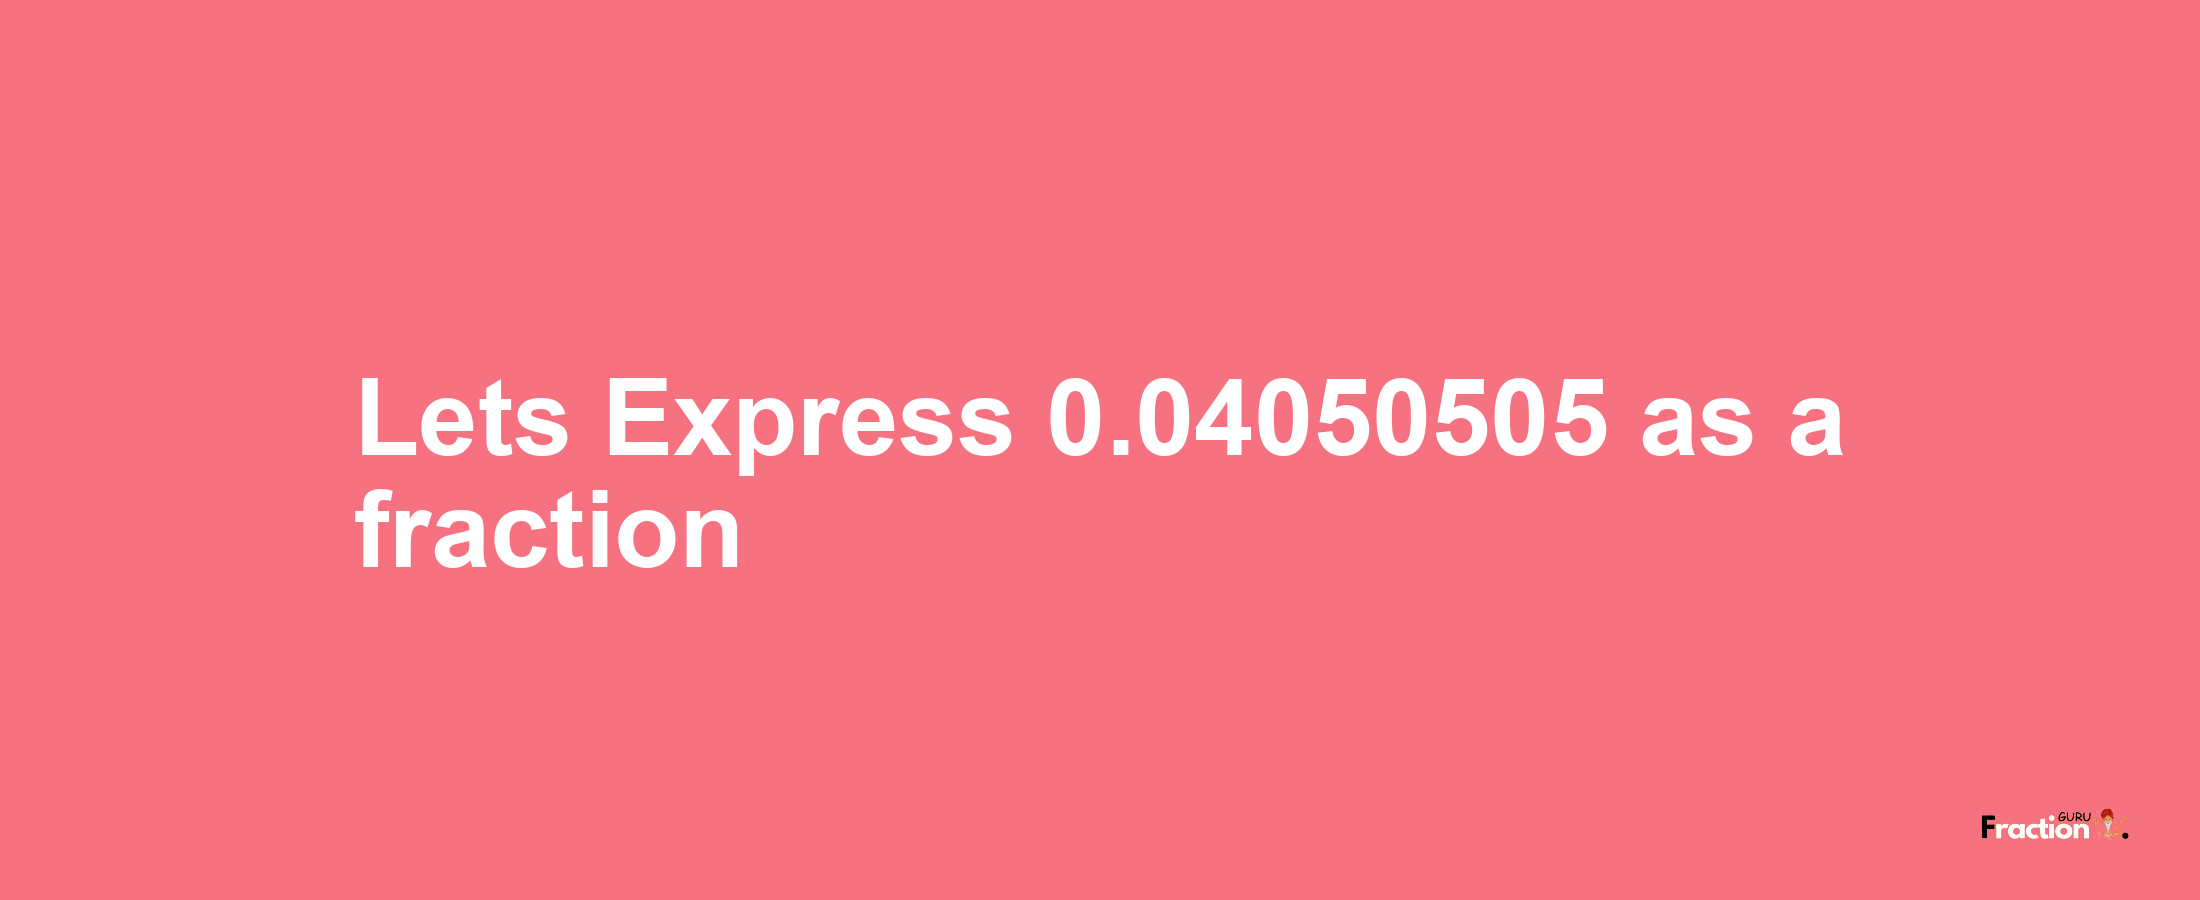 Lets Express 0.04050505 as afraction